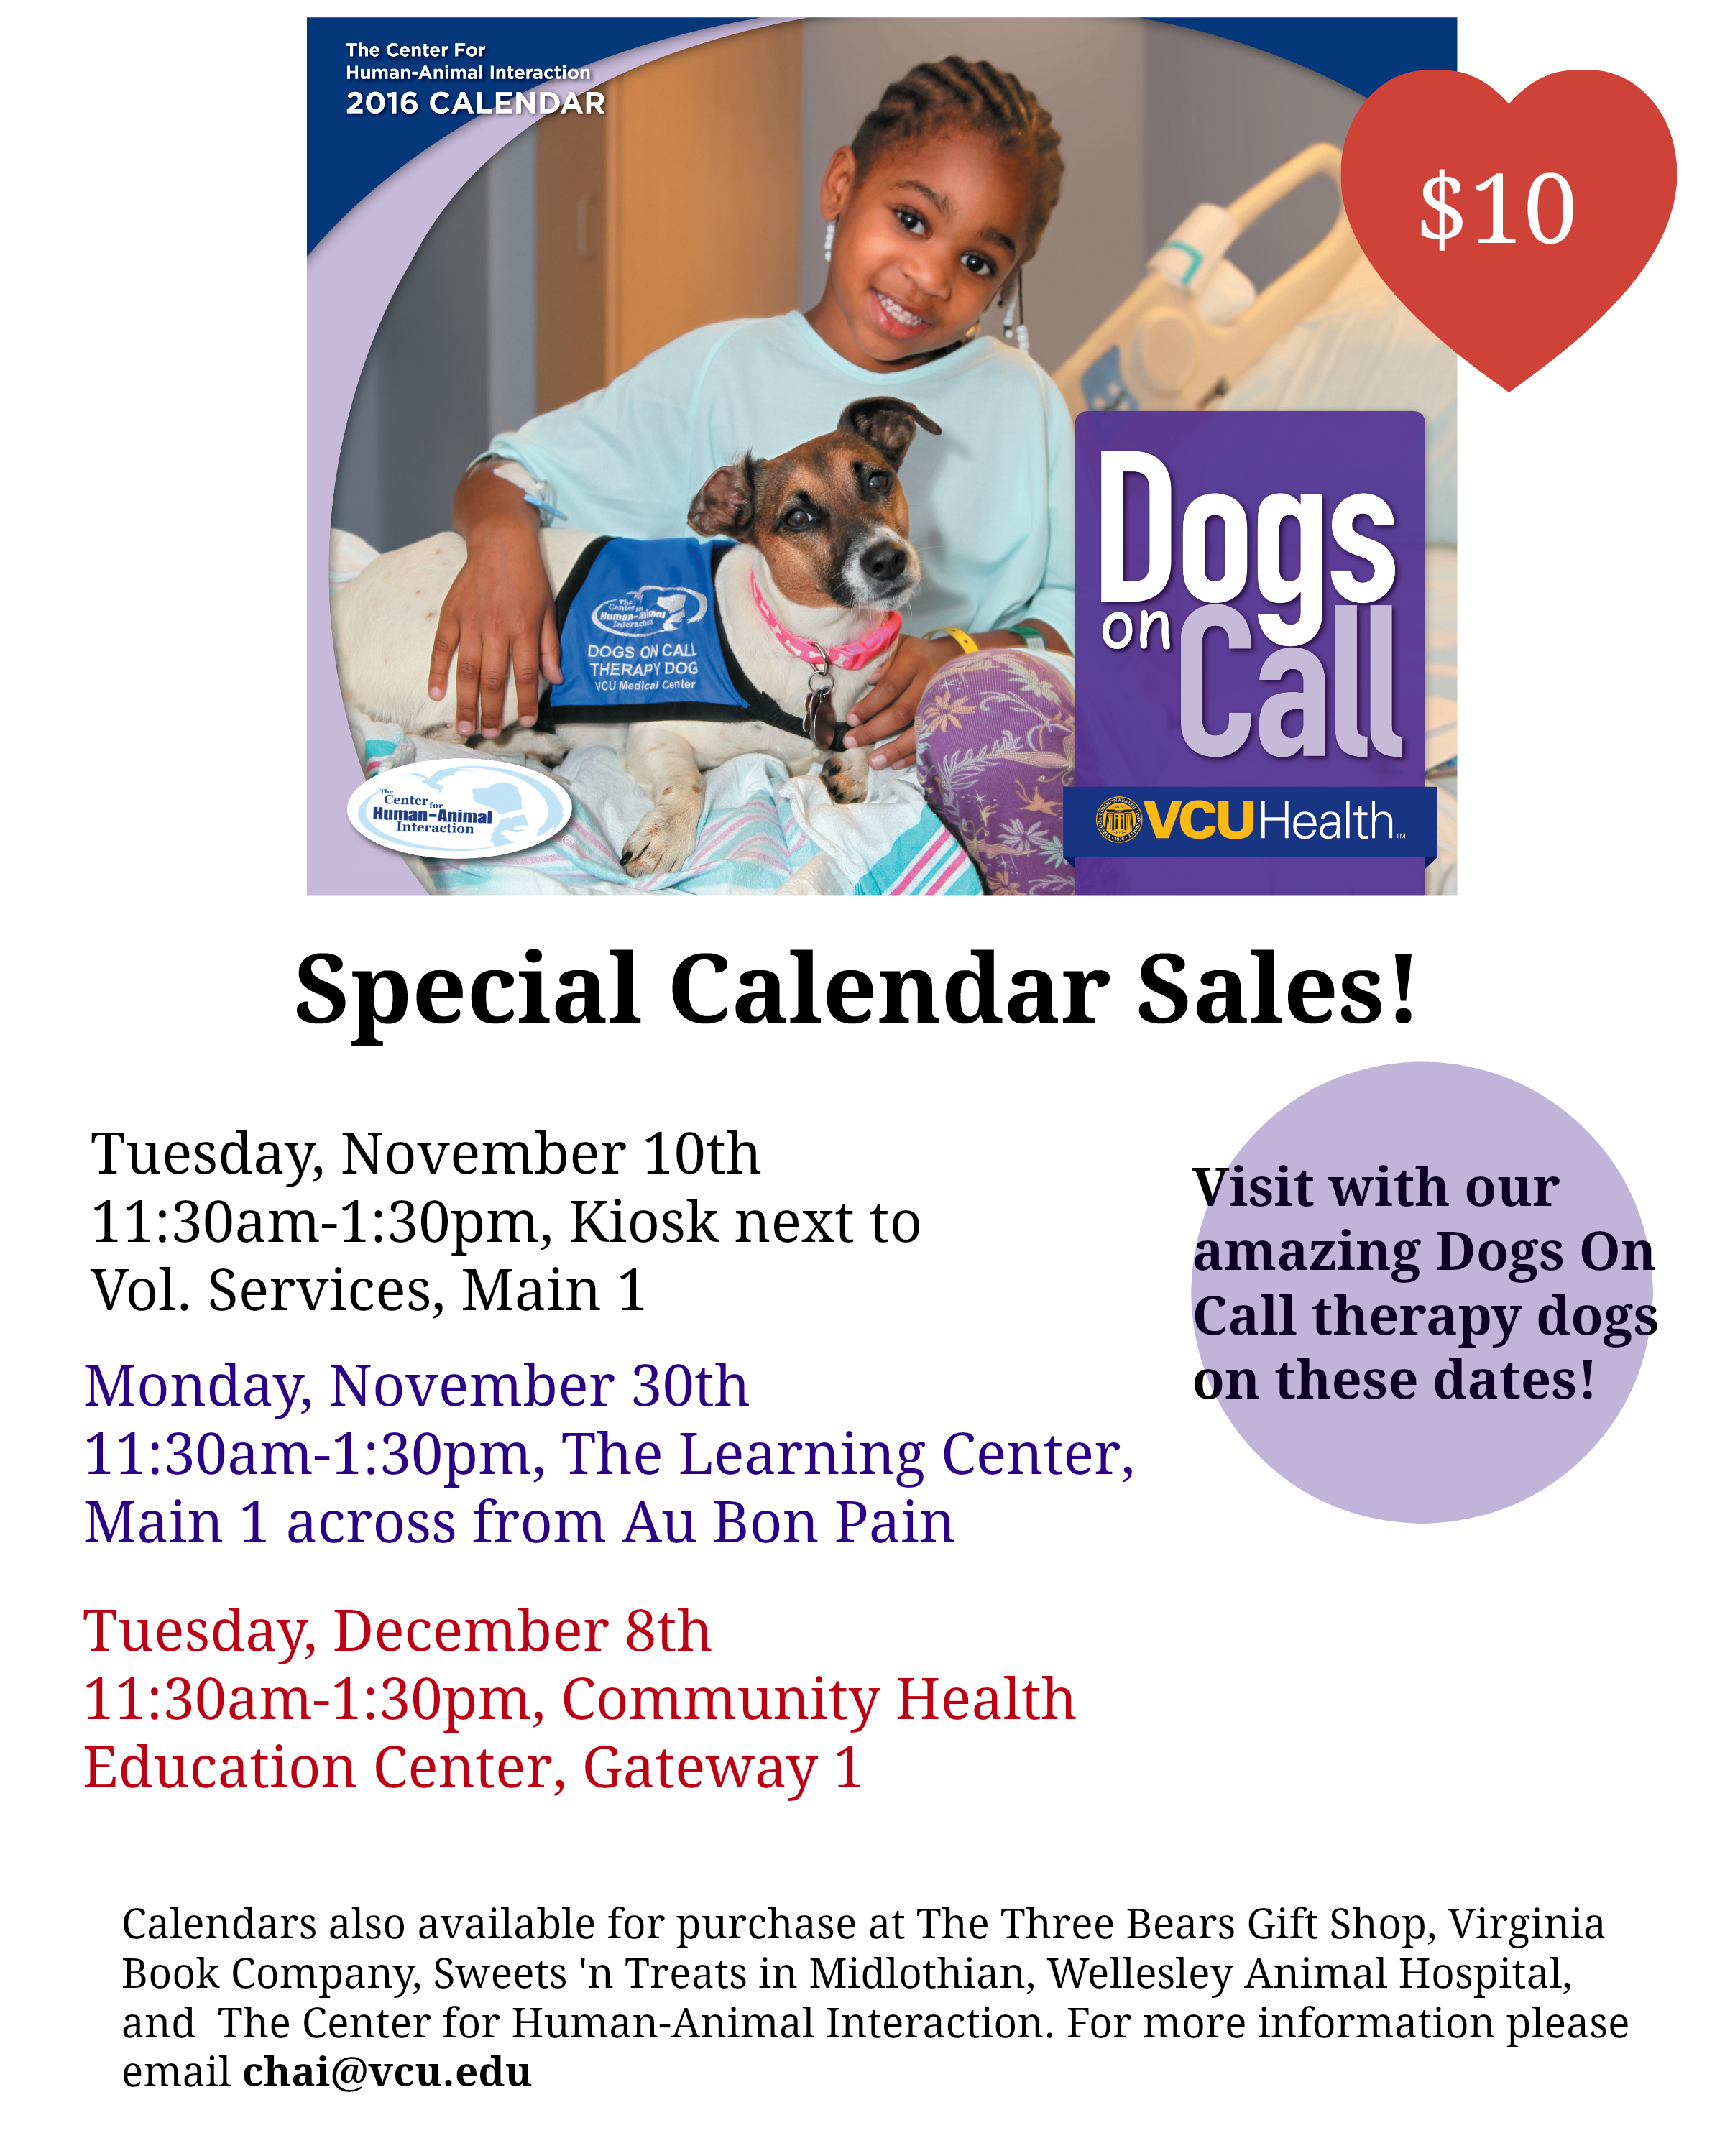 The 2016 Dogs On Call Calendar features a young patient sitting on a hospital bed with Dogs On Call therapy dog Emma, a jack russell terrier, laying beside her. Emma is wearing a blue Dogs On Call vest. There is a text version of the image text - the calendar sales dates - below the image itself.